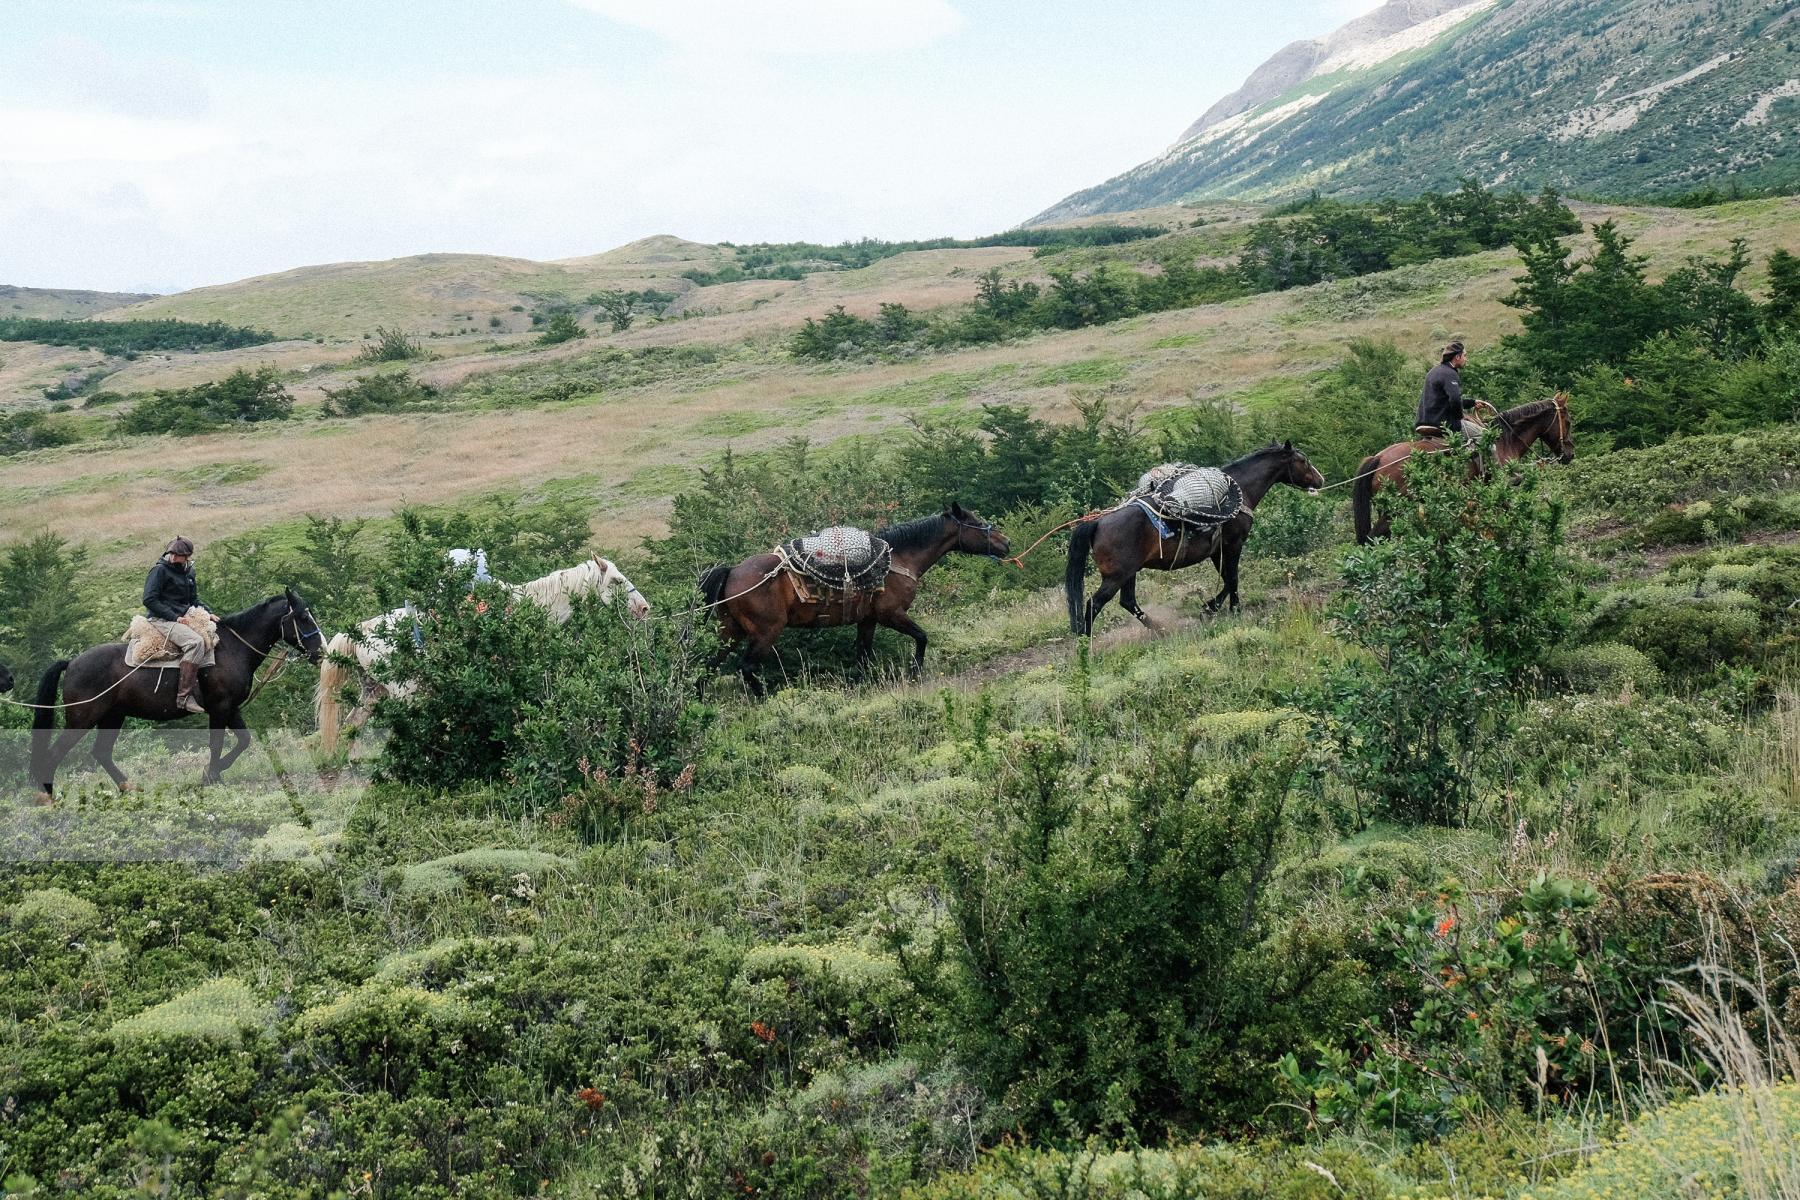 Purchase Torres del Paine, horses by Alexia Liakounakou